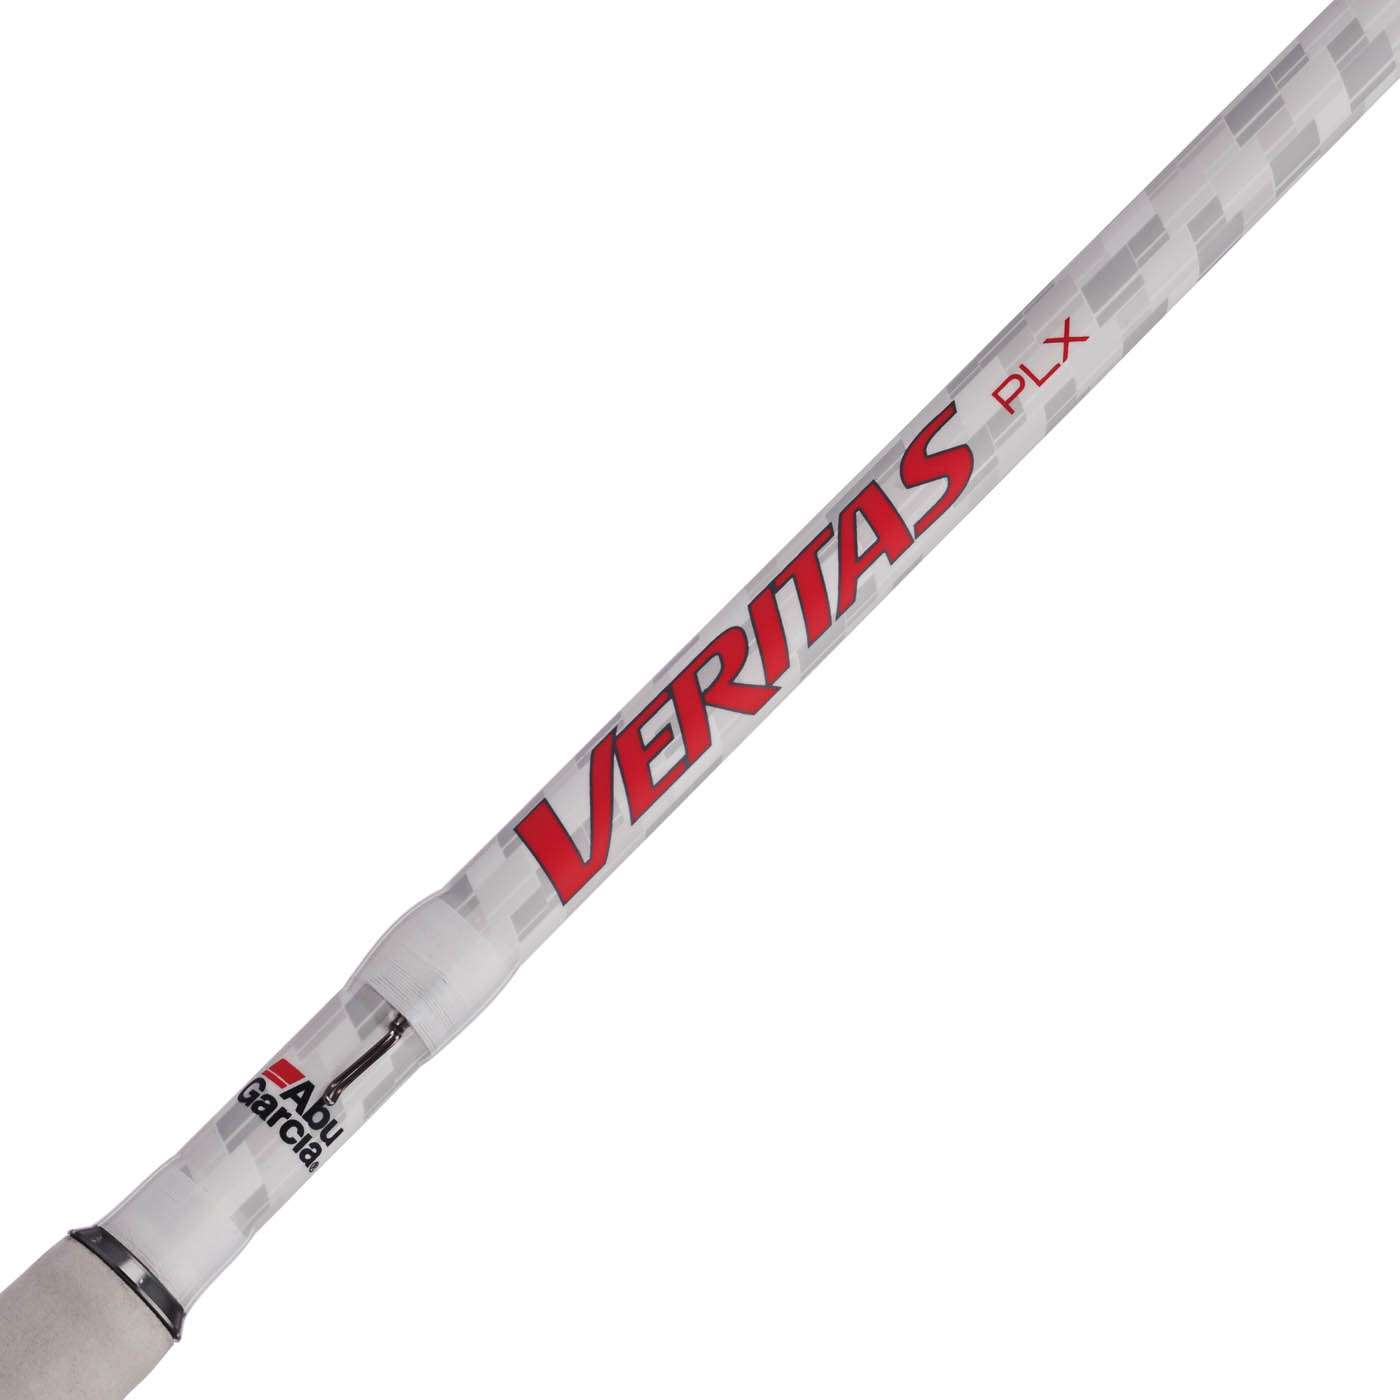 <p><strong>Abu Garcia Veritas Rods</strong></p><p>Veritas rods combine a 30-ton construction with Sublayer Armor for uncompromising strength and sensitivity in a lightweight, balanced design. The Abu-designed up locking micro click reel seat design offers secure connection between the rod and reel and the ultimate in comfort. $99.95. <a href=